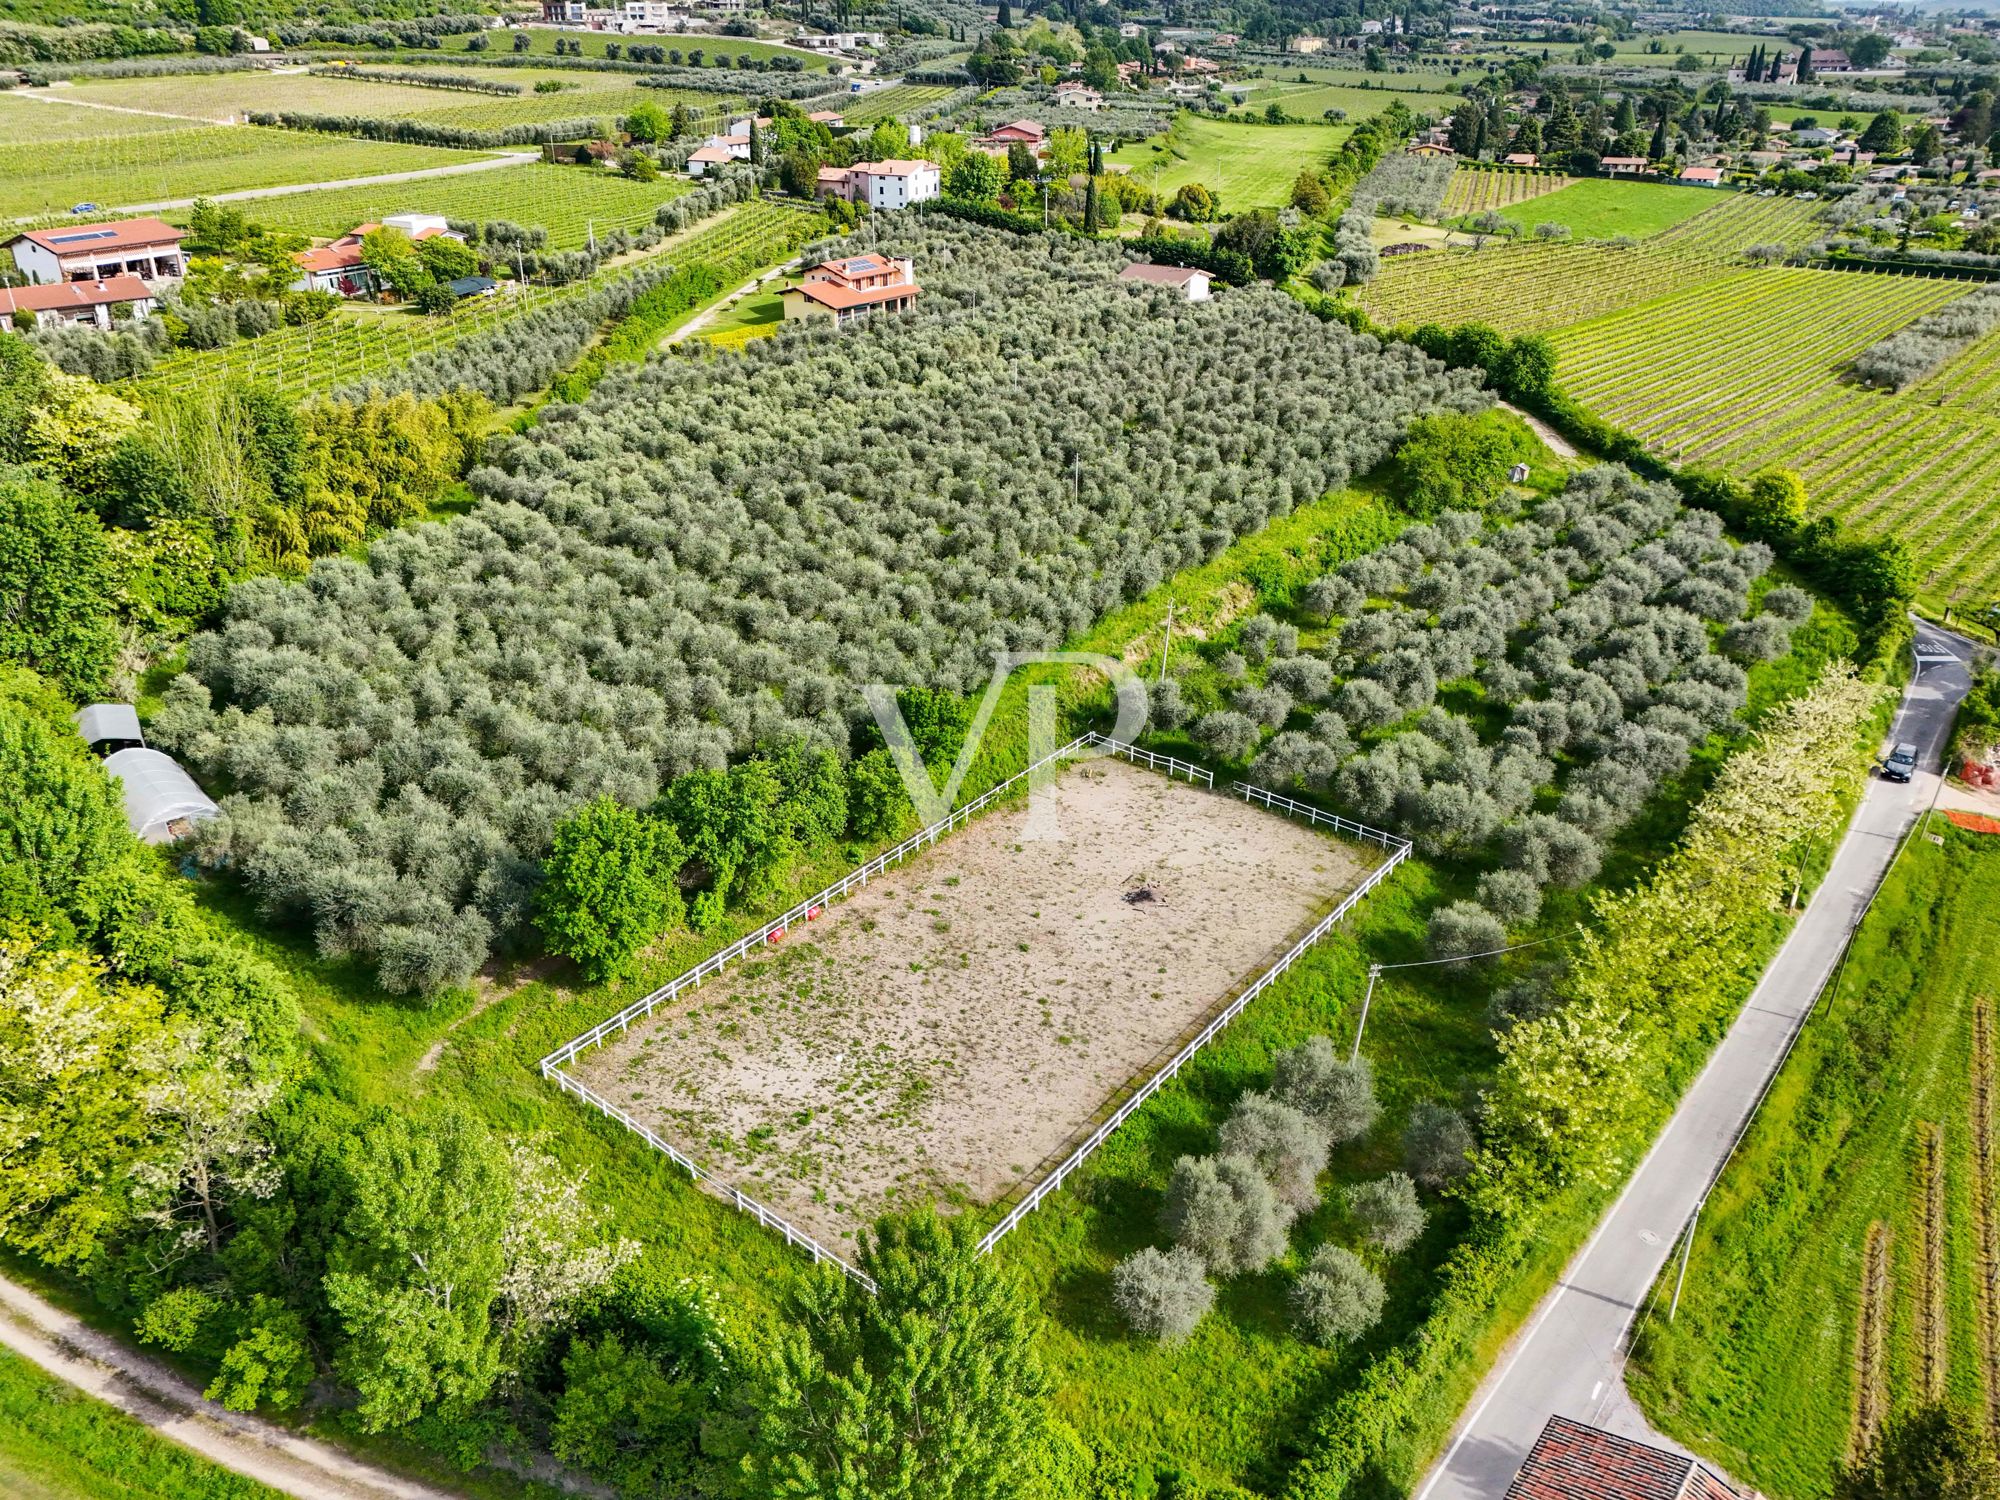 Vacation home, Agriturismo, riding arena and B&B nestled in 3 hectares of olive grove